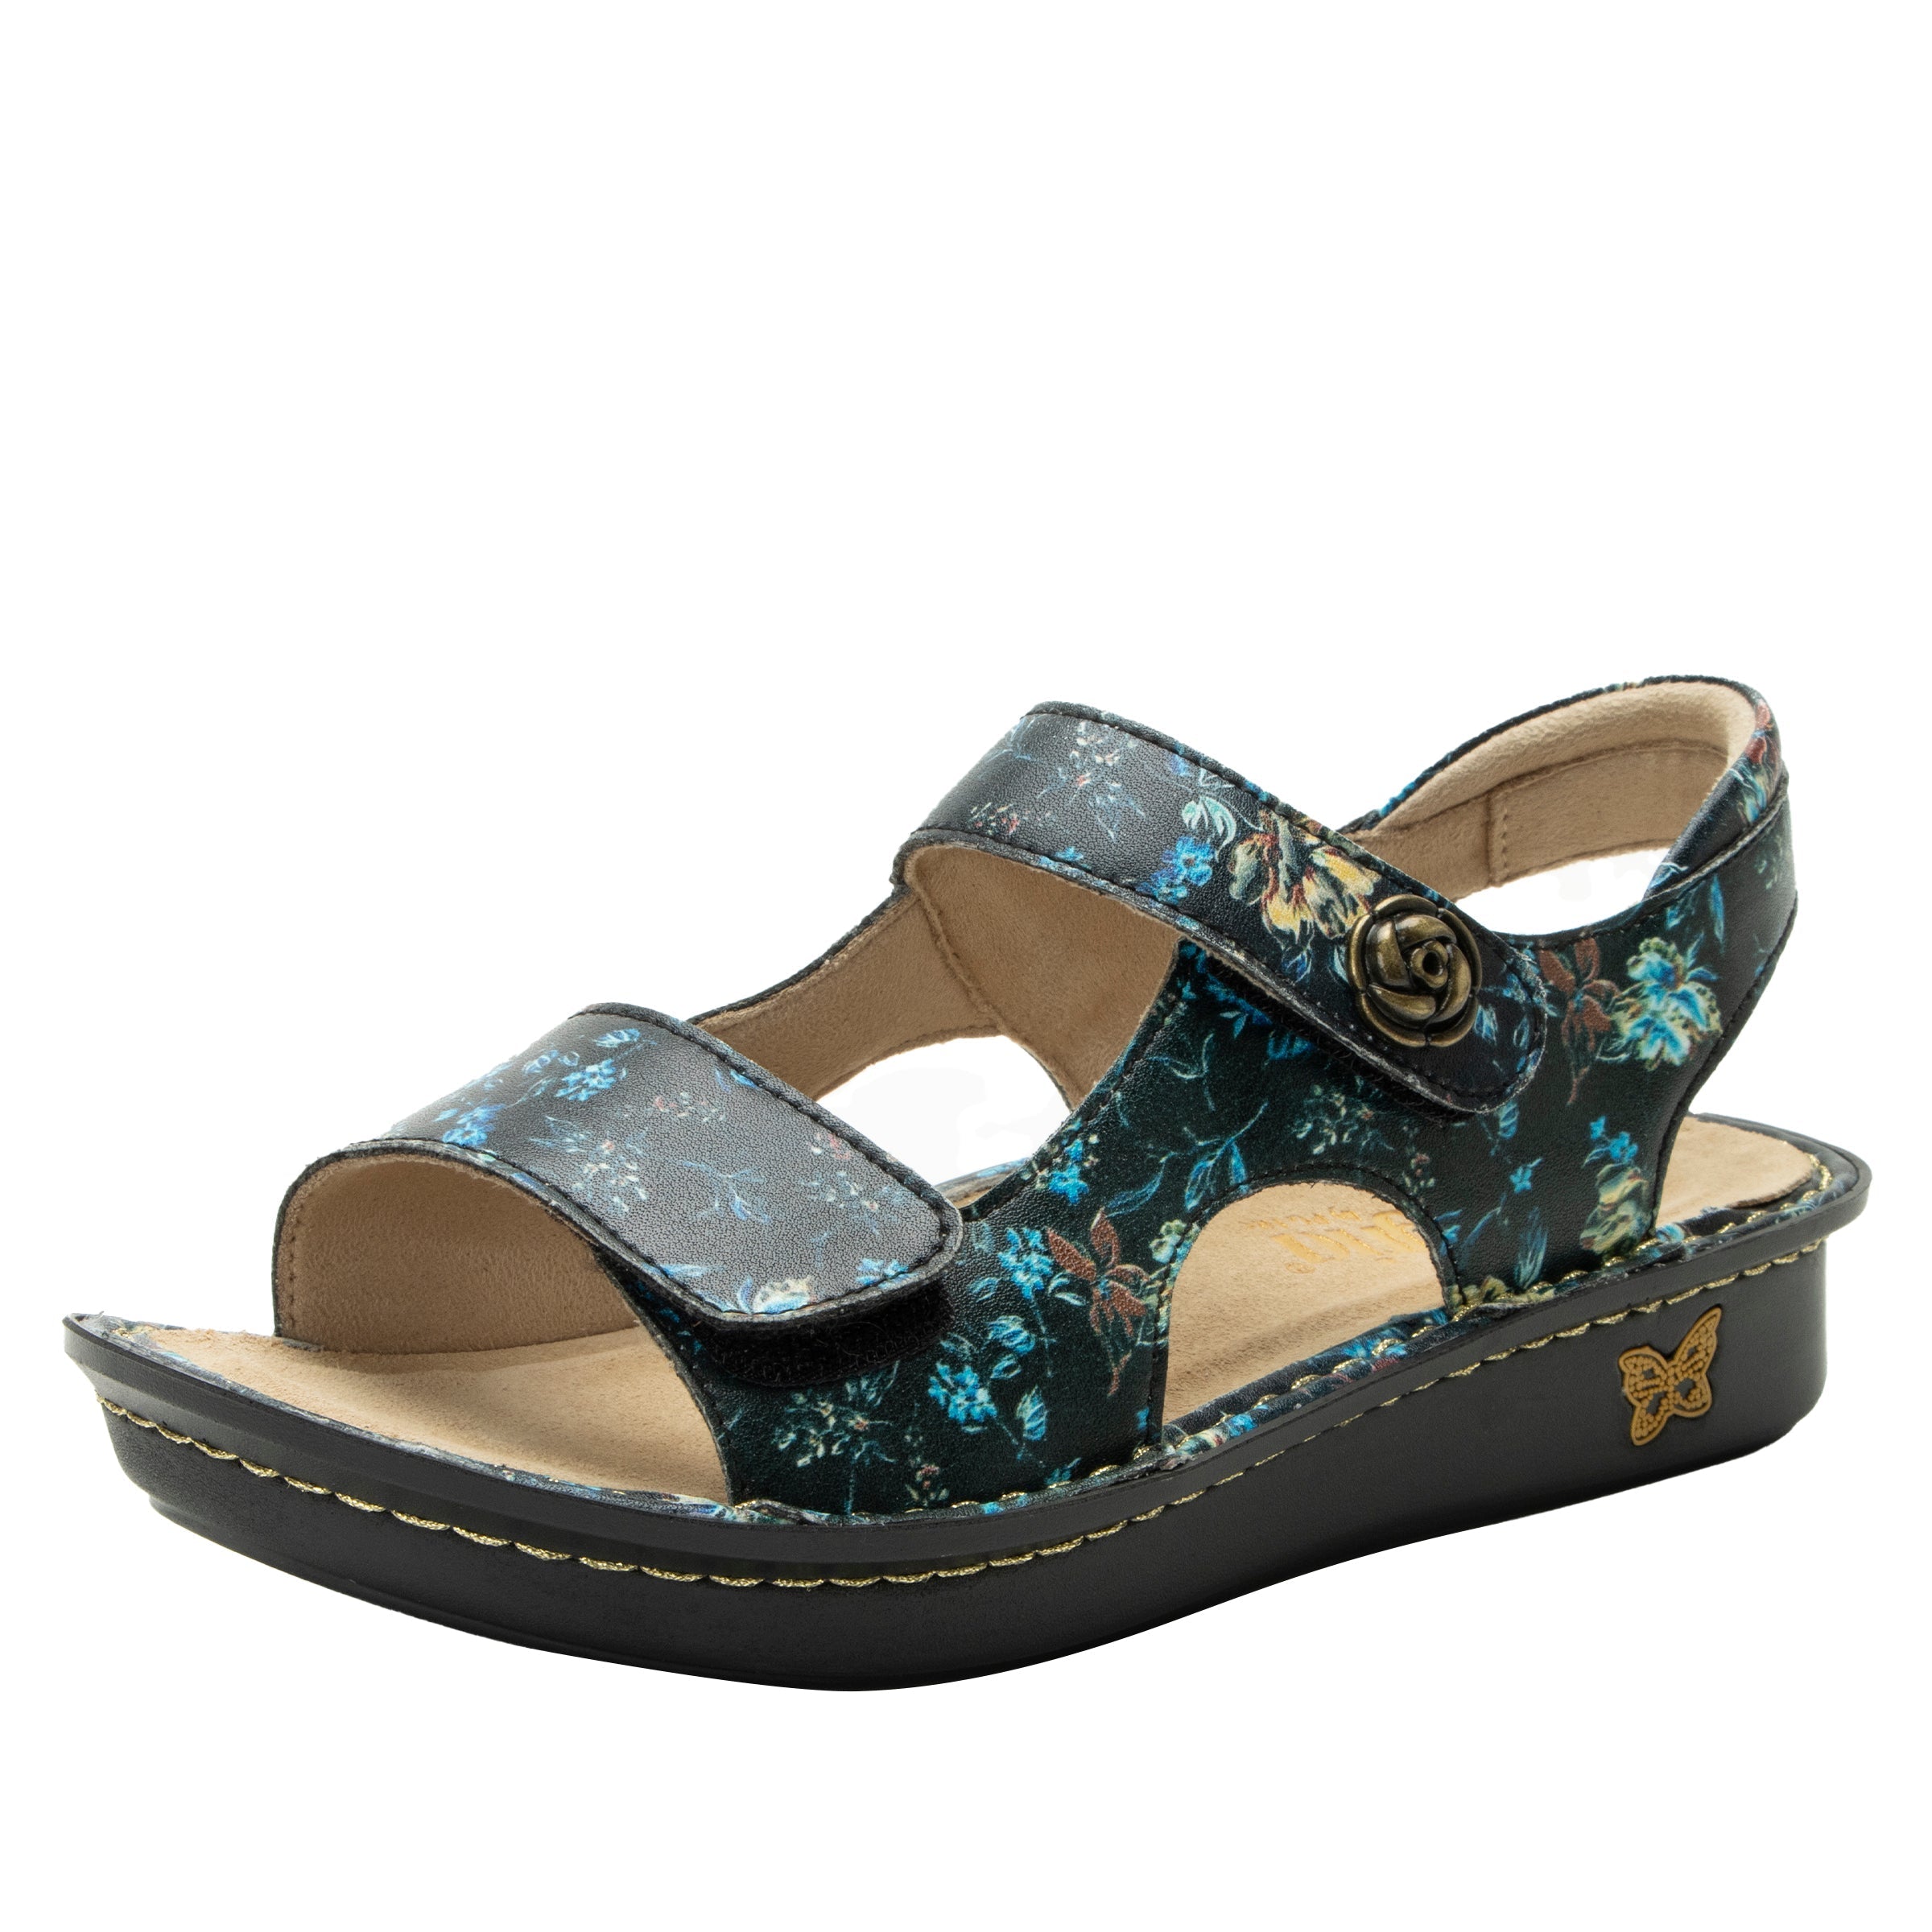 Beckie Passionate Sandal - Alegria Shoes